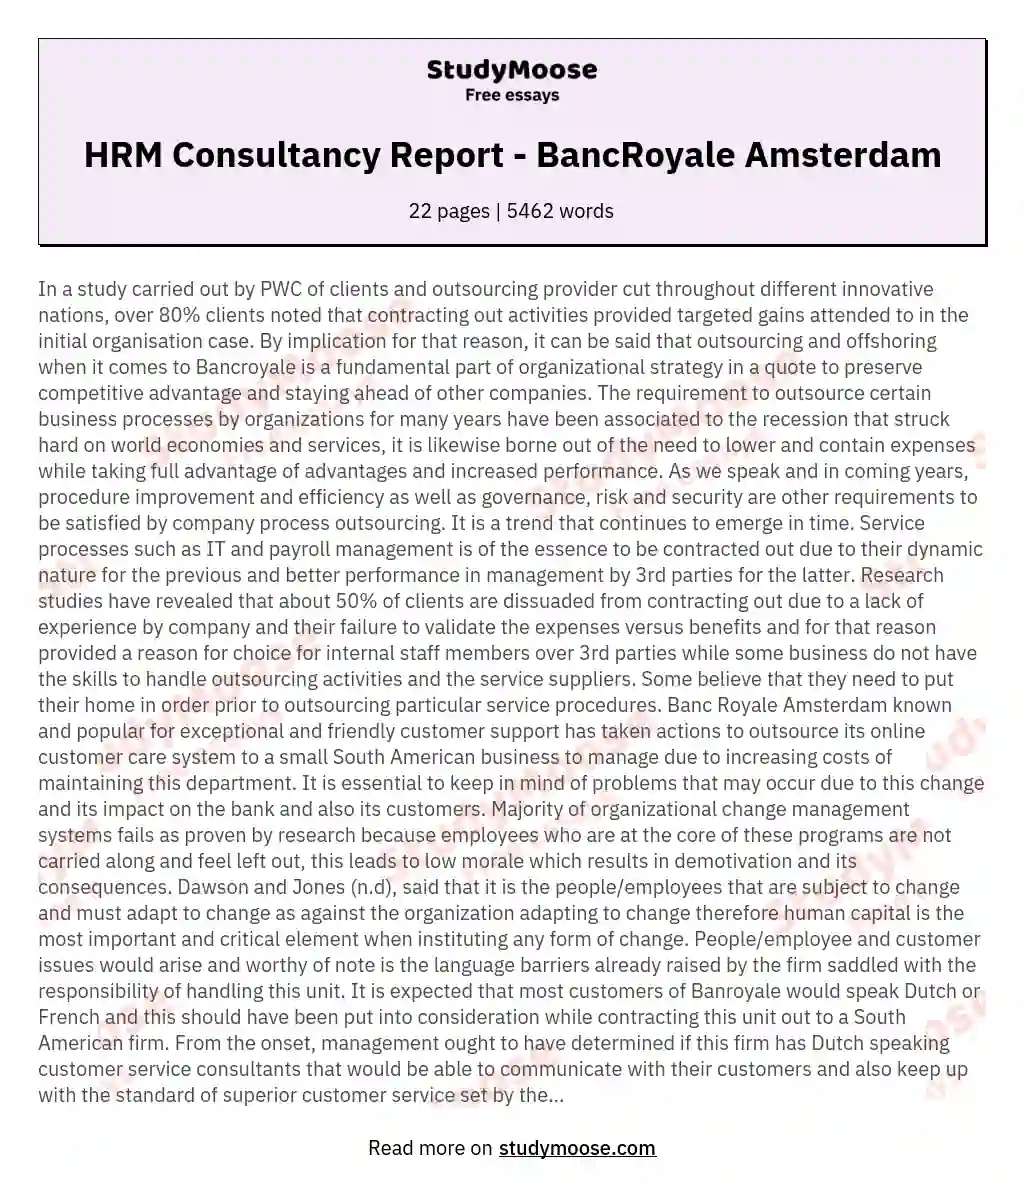 HRM Consultancy Report - BancRoyale Amsterdam essay